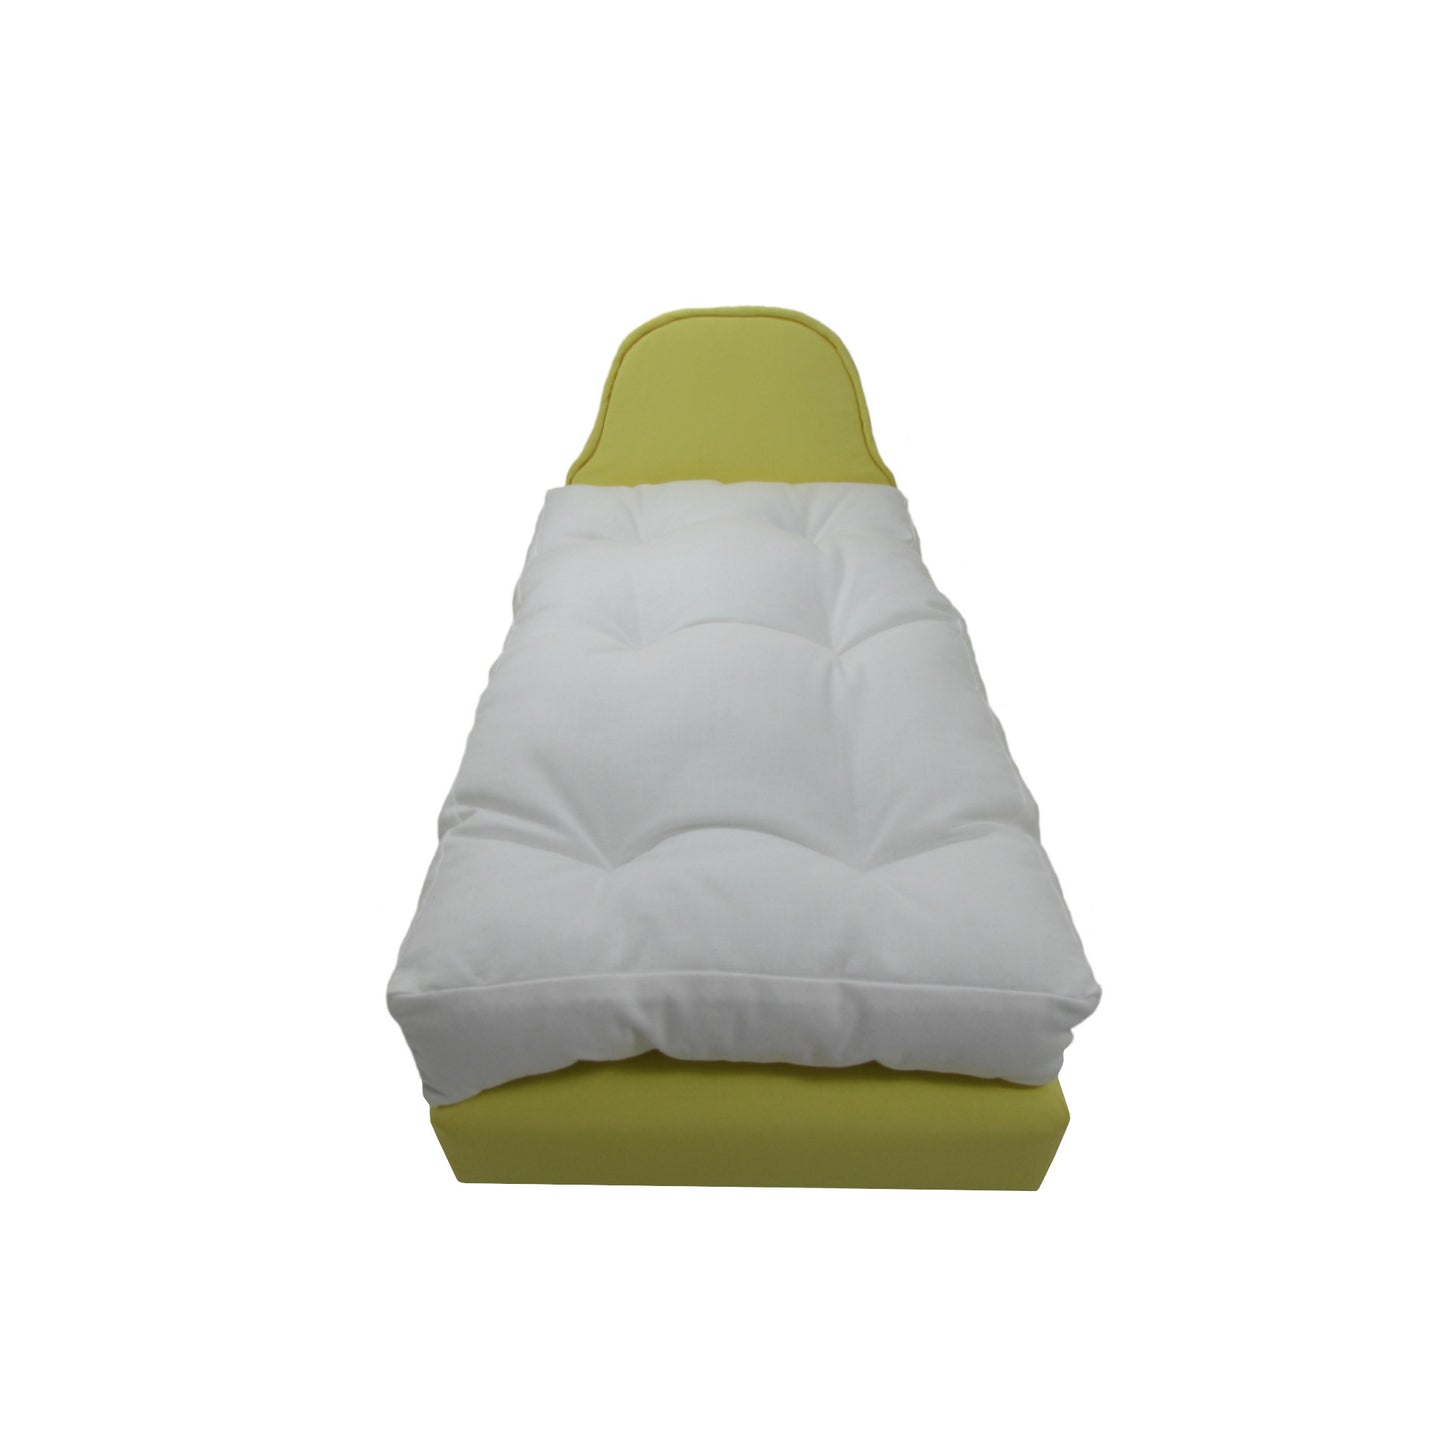 Upholstered Light Yellow Doll Bed for 14.5-inch dolls Second view